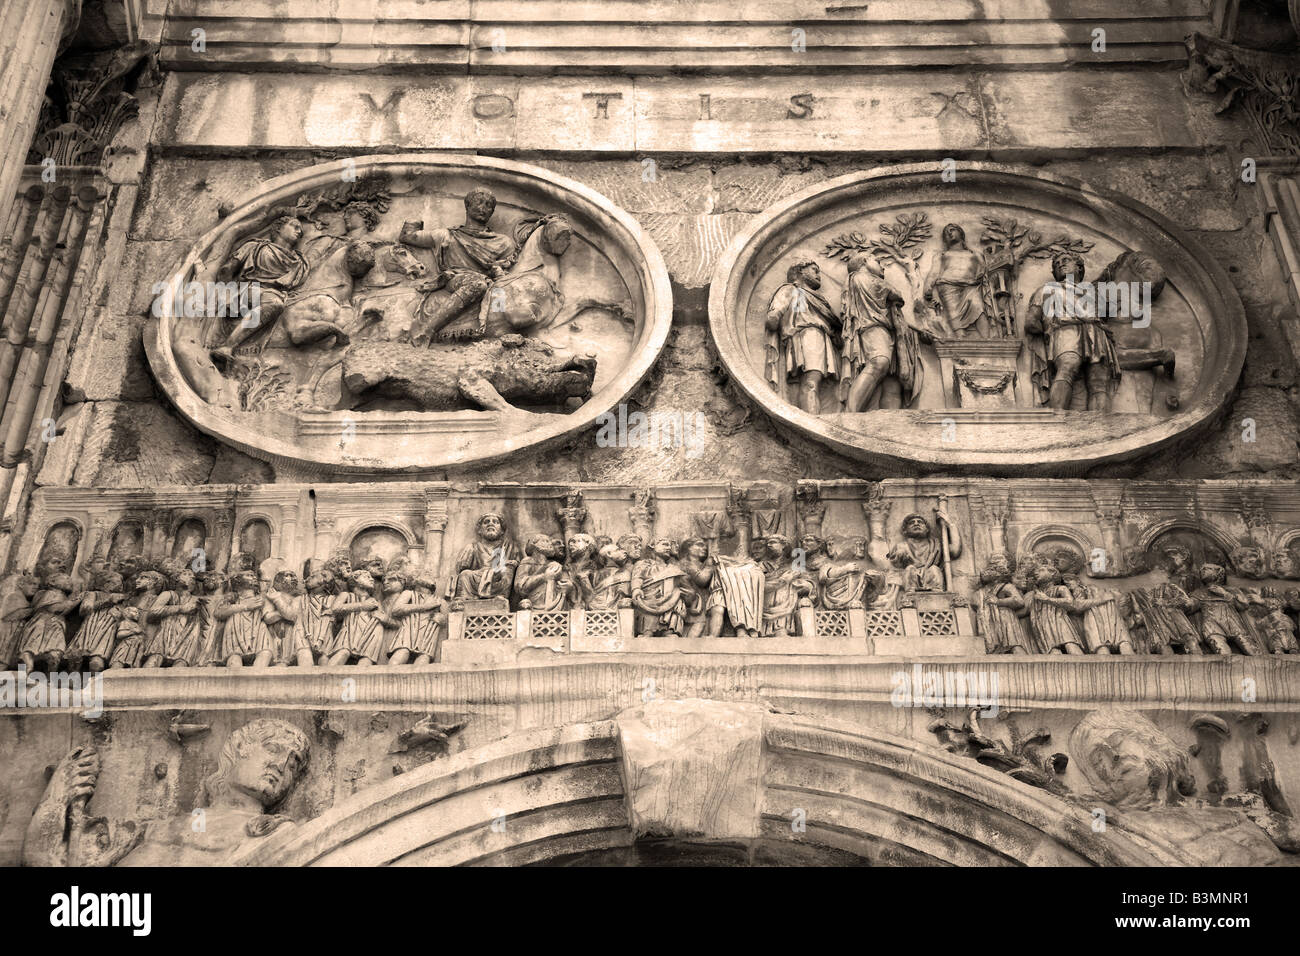 Italy Rome Details on part of the Arch of Constantine in the Forum in Rome Stock Photo